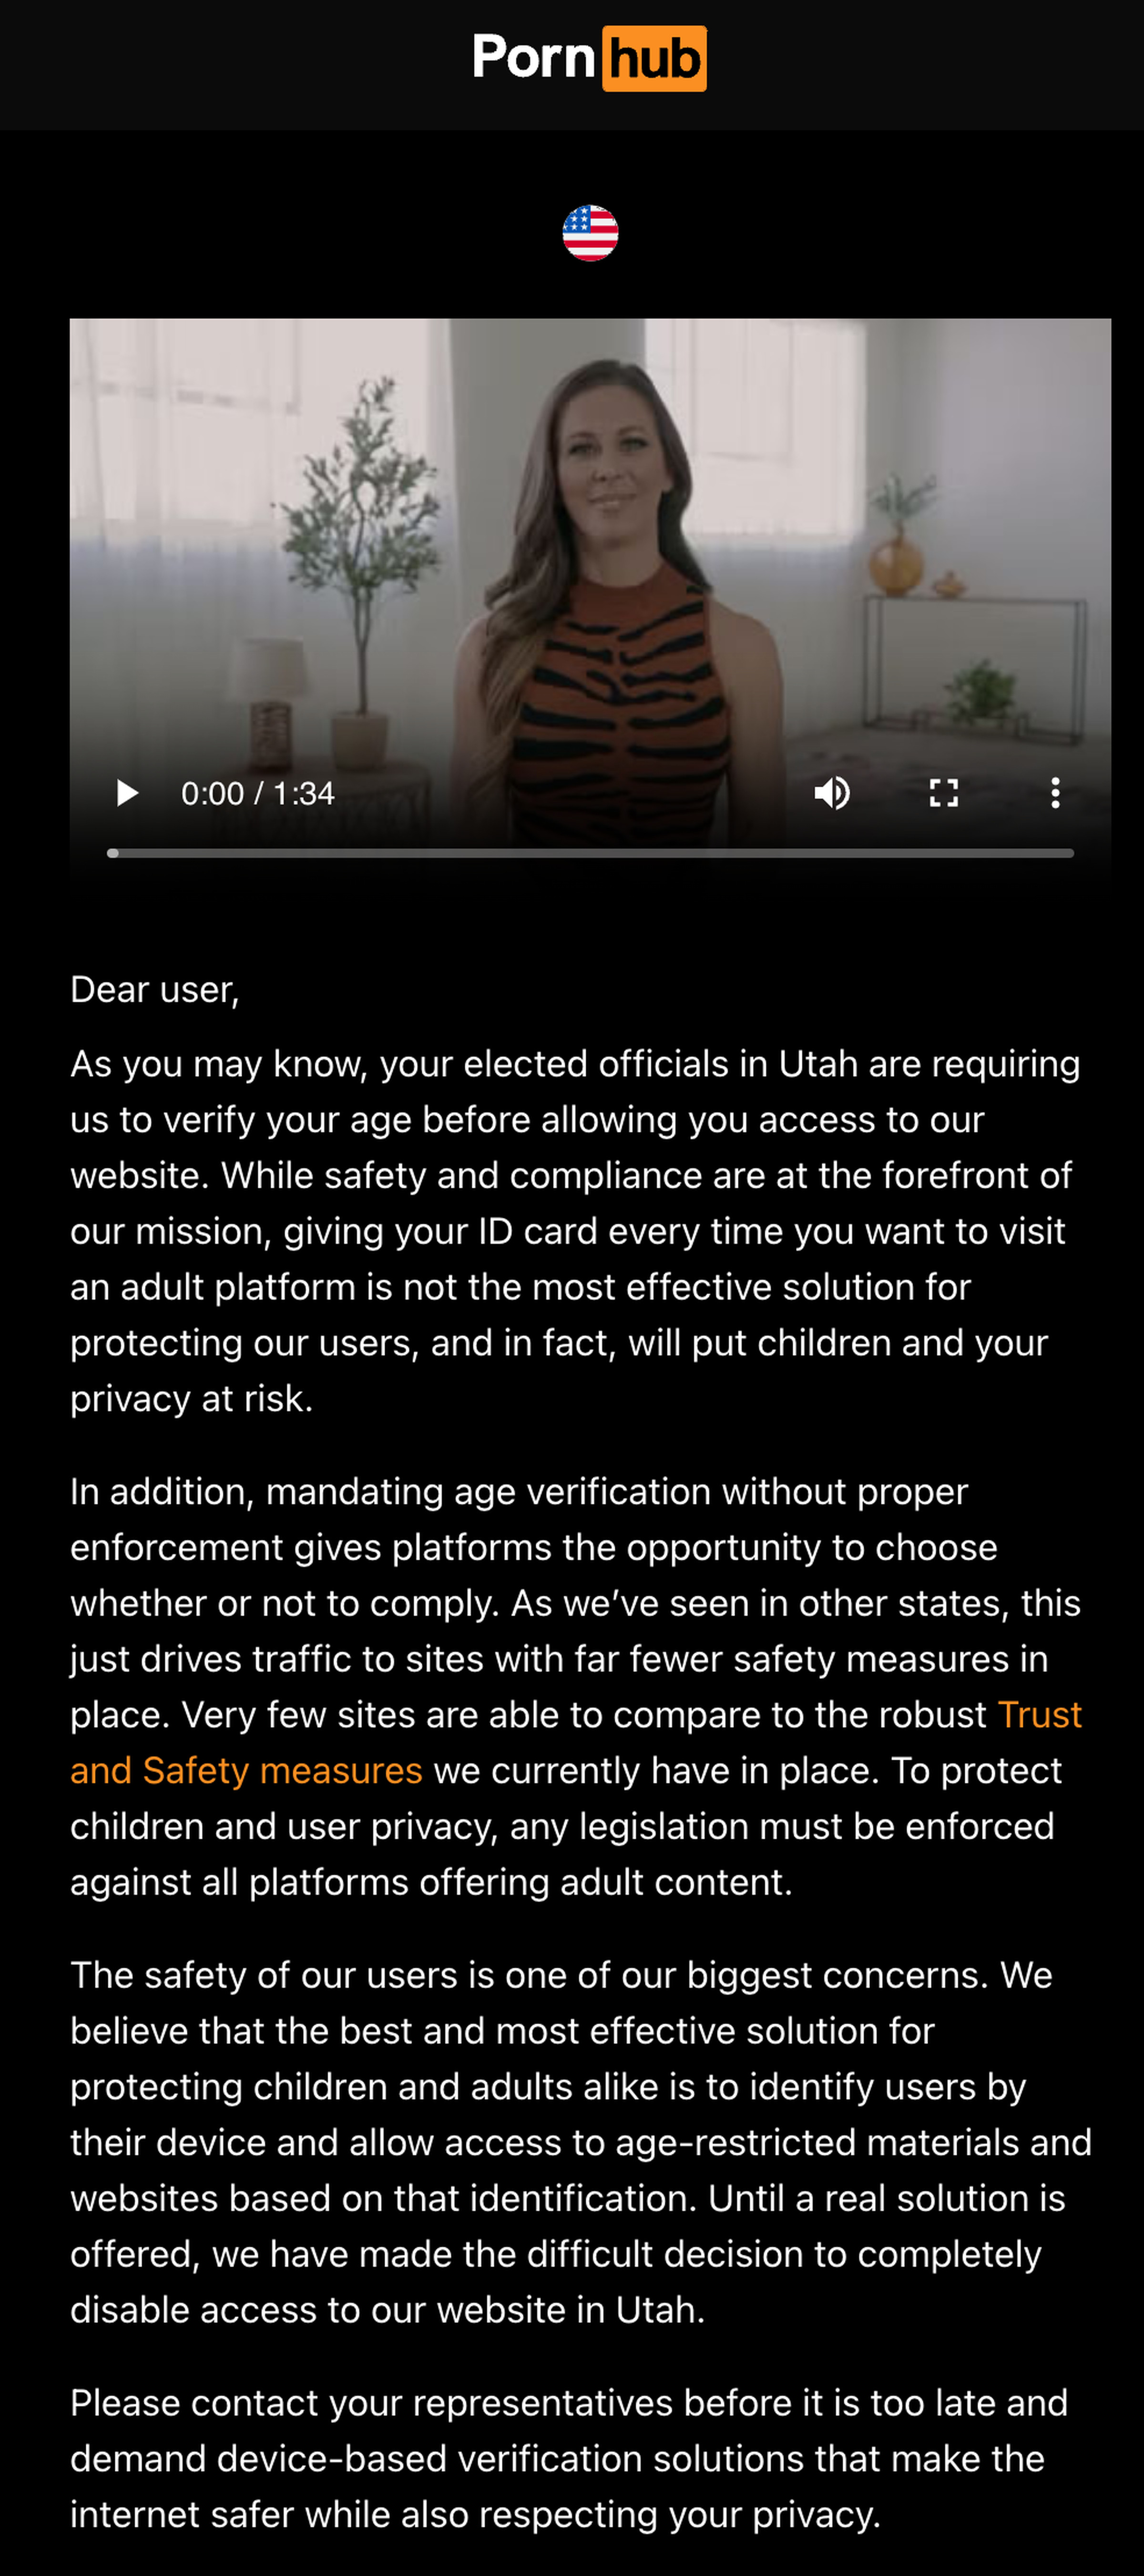 A screenshot of the message as seen on Pornhub for Utah users.